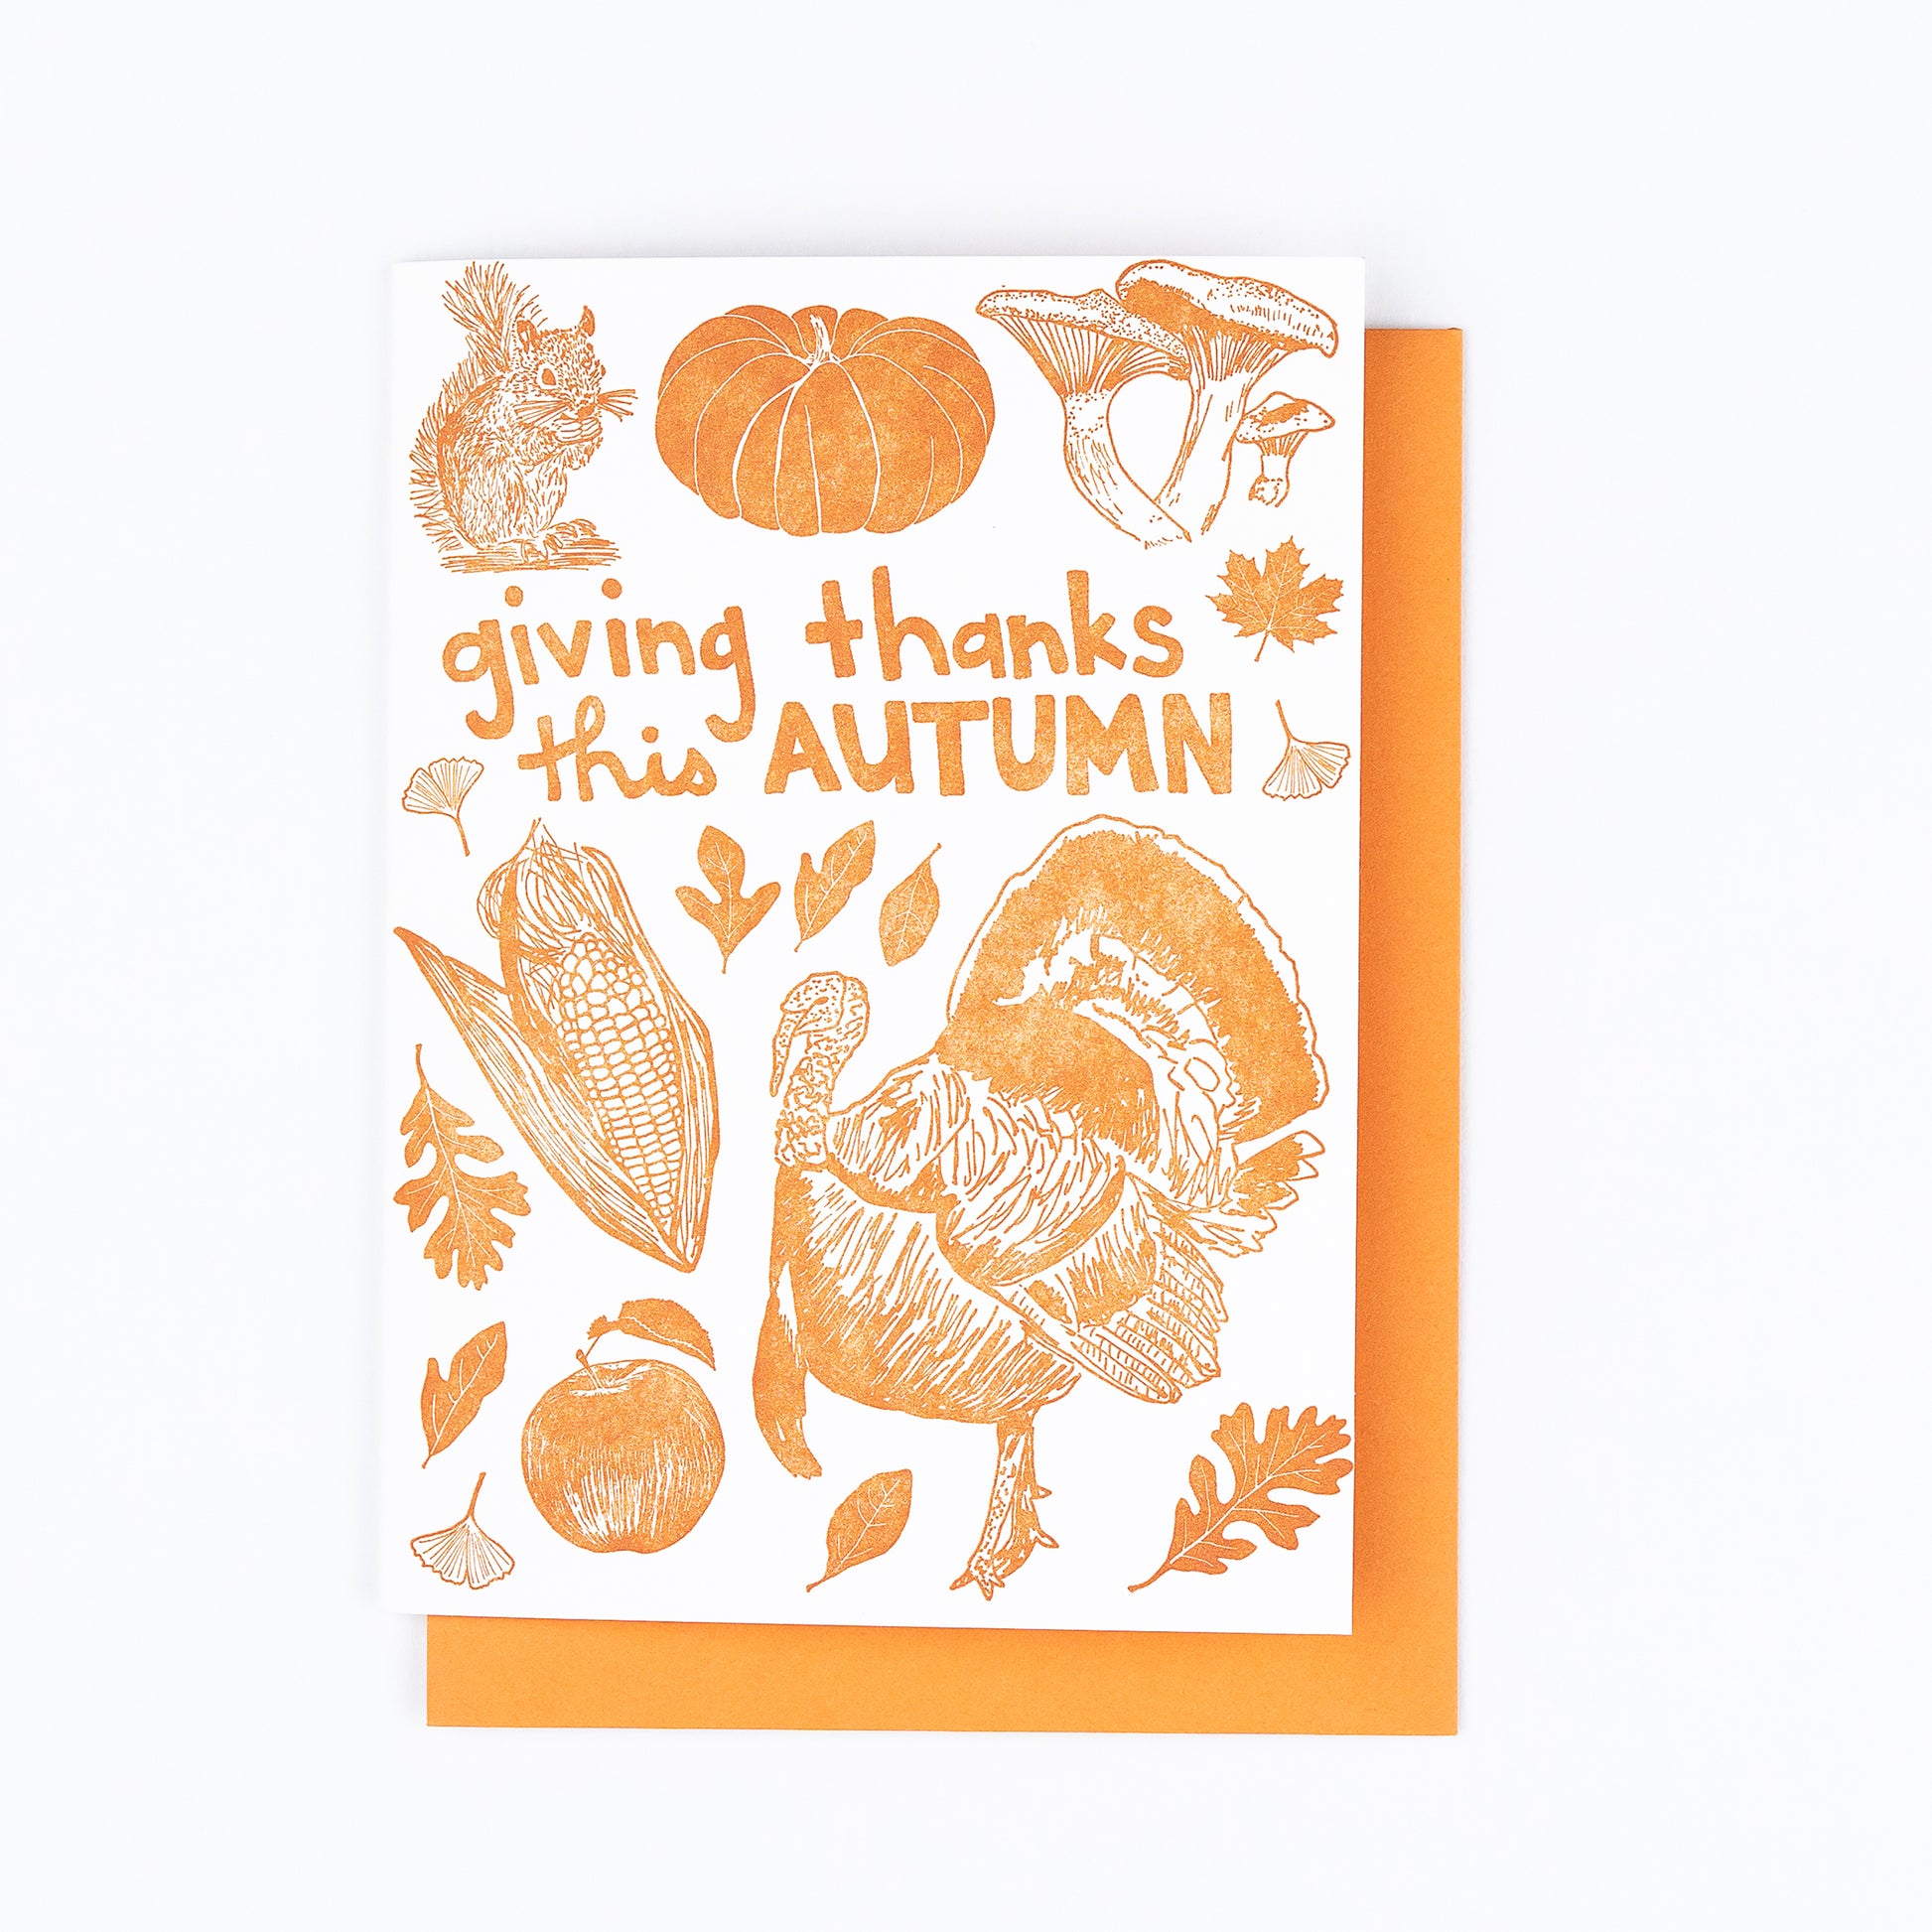 This cheerful Autumn card features all the iconic images of the fall season: squirrel, heritage pumpkin, mushrooms, fall leaves (maple, oak, sassafras, and ginkgo), a tom turkey, corn harvest, and a fresh-picked apple. Perfect for Thanksgiving. Vibrant orange ink paired with an orange envelope. Blank interior. 